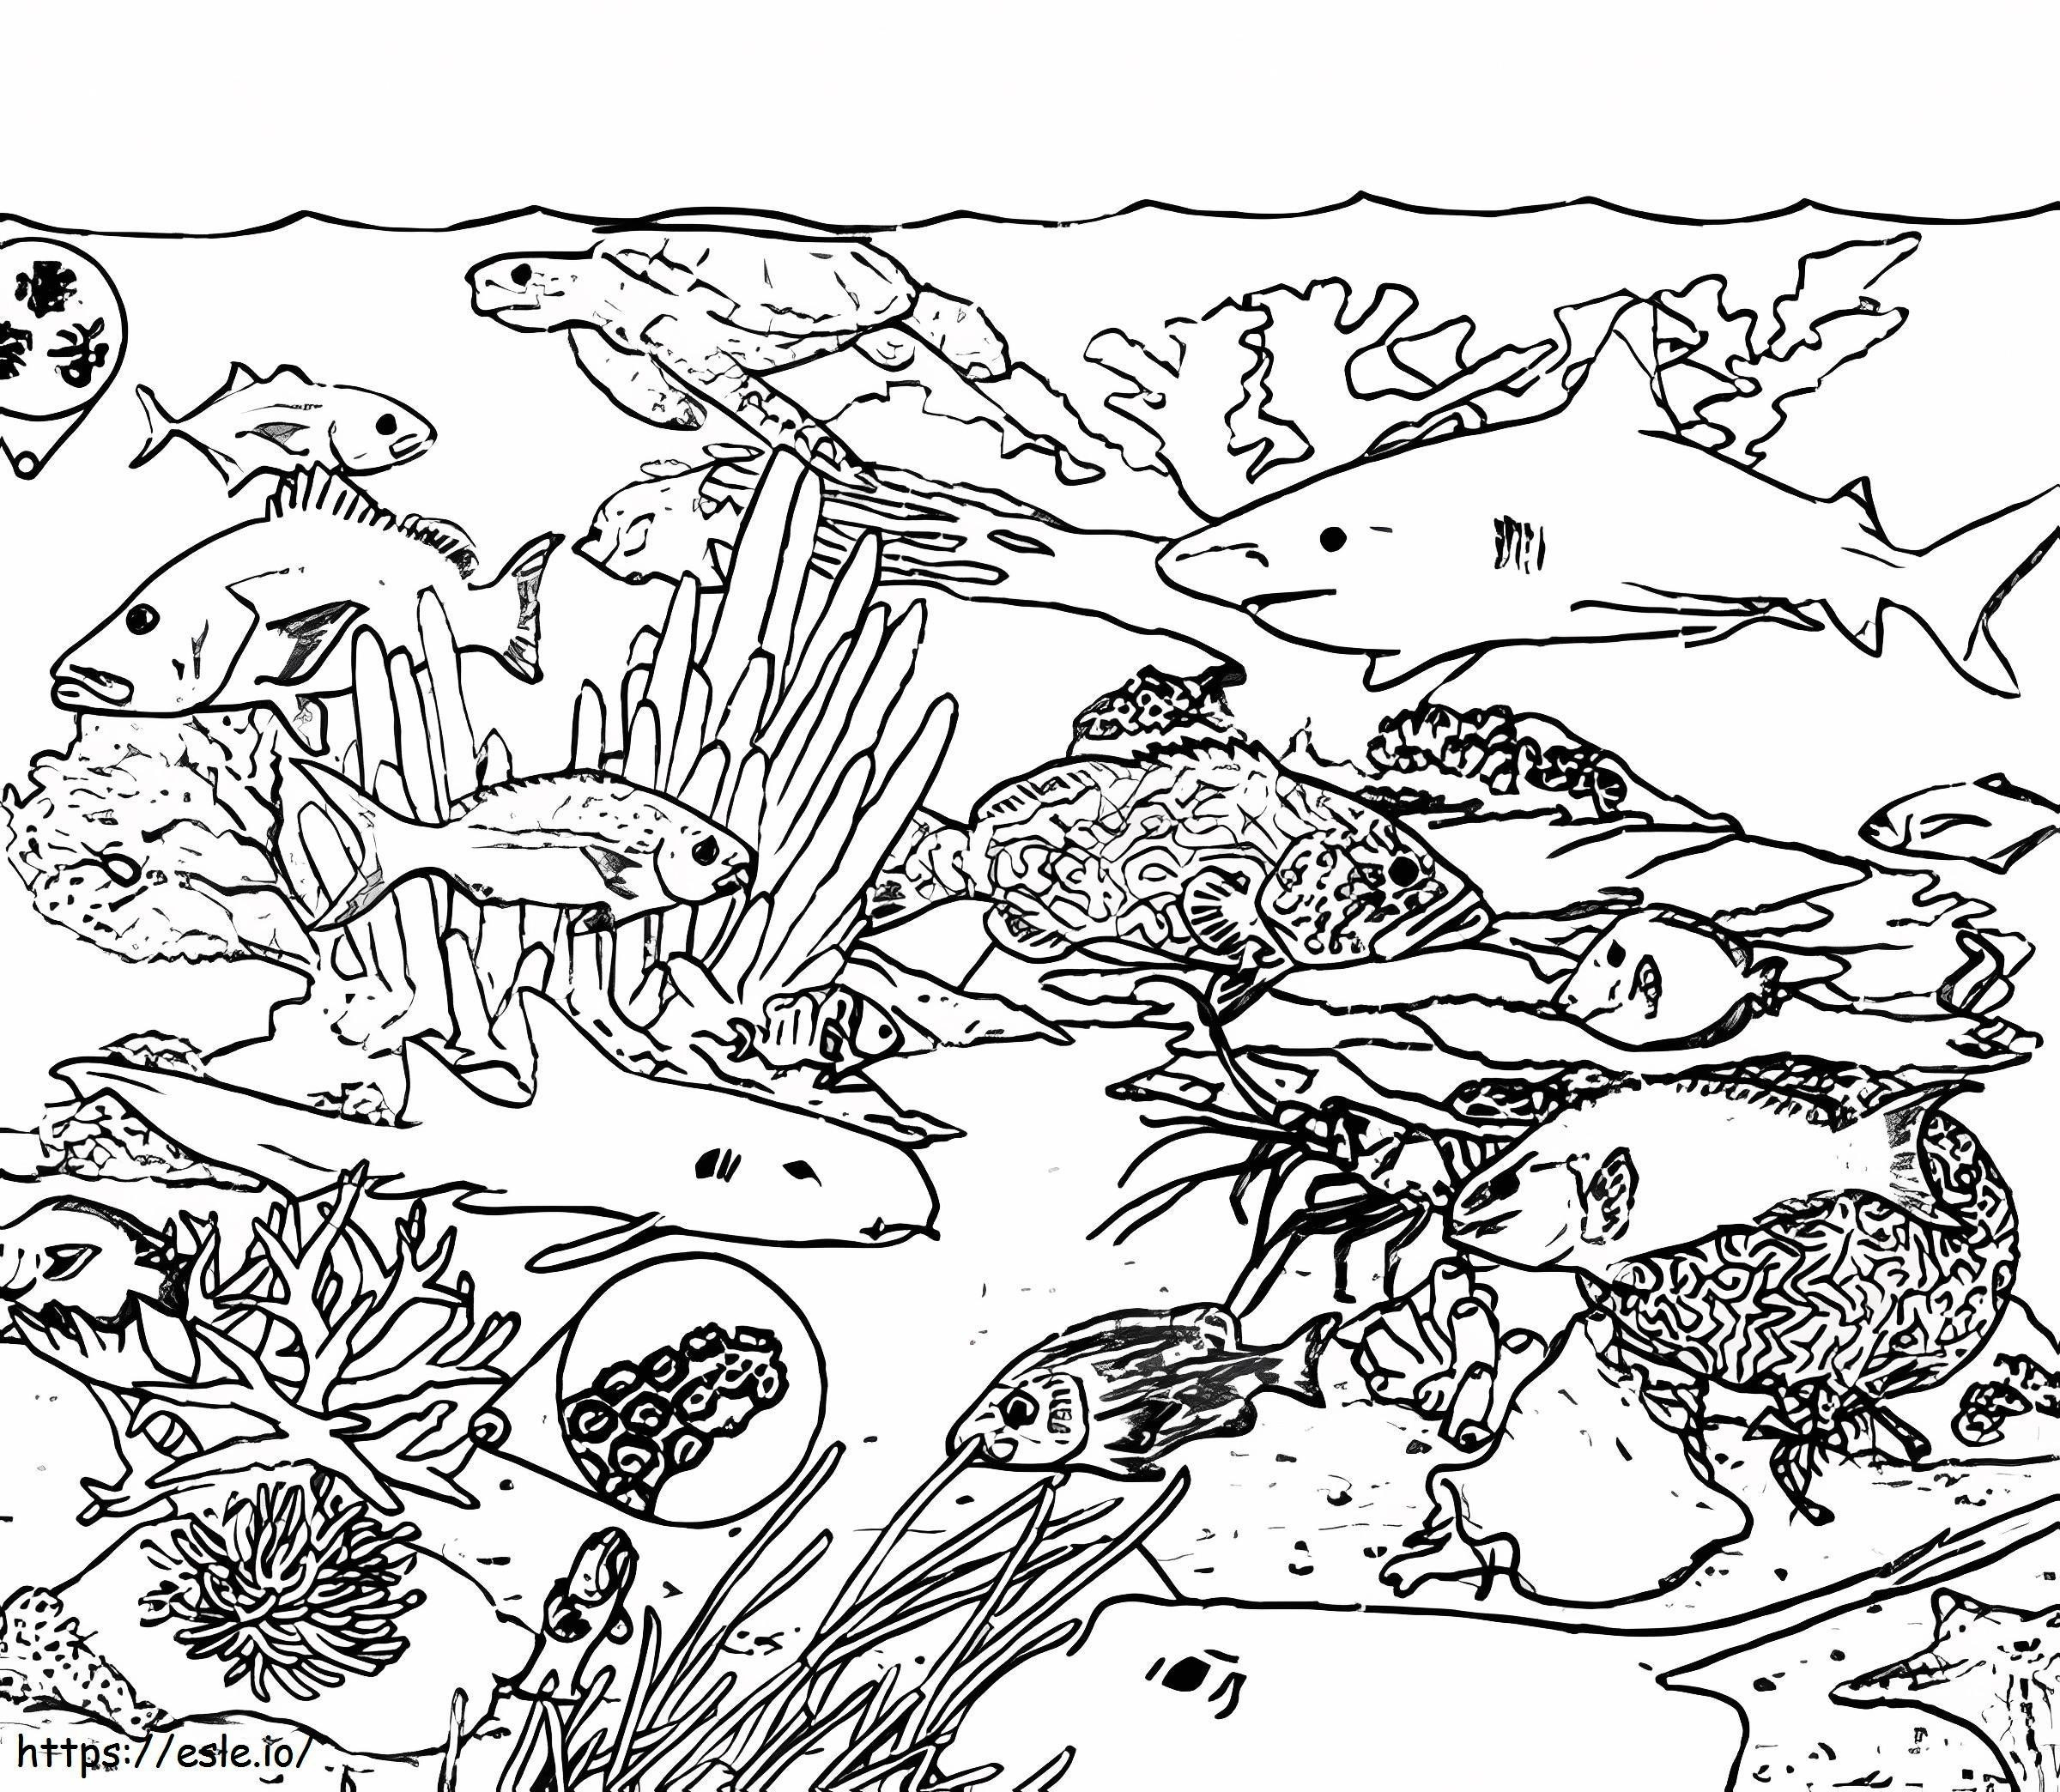 Coral Reef Ecosystem coloring page